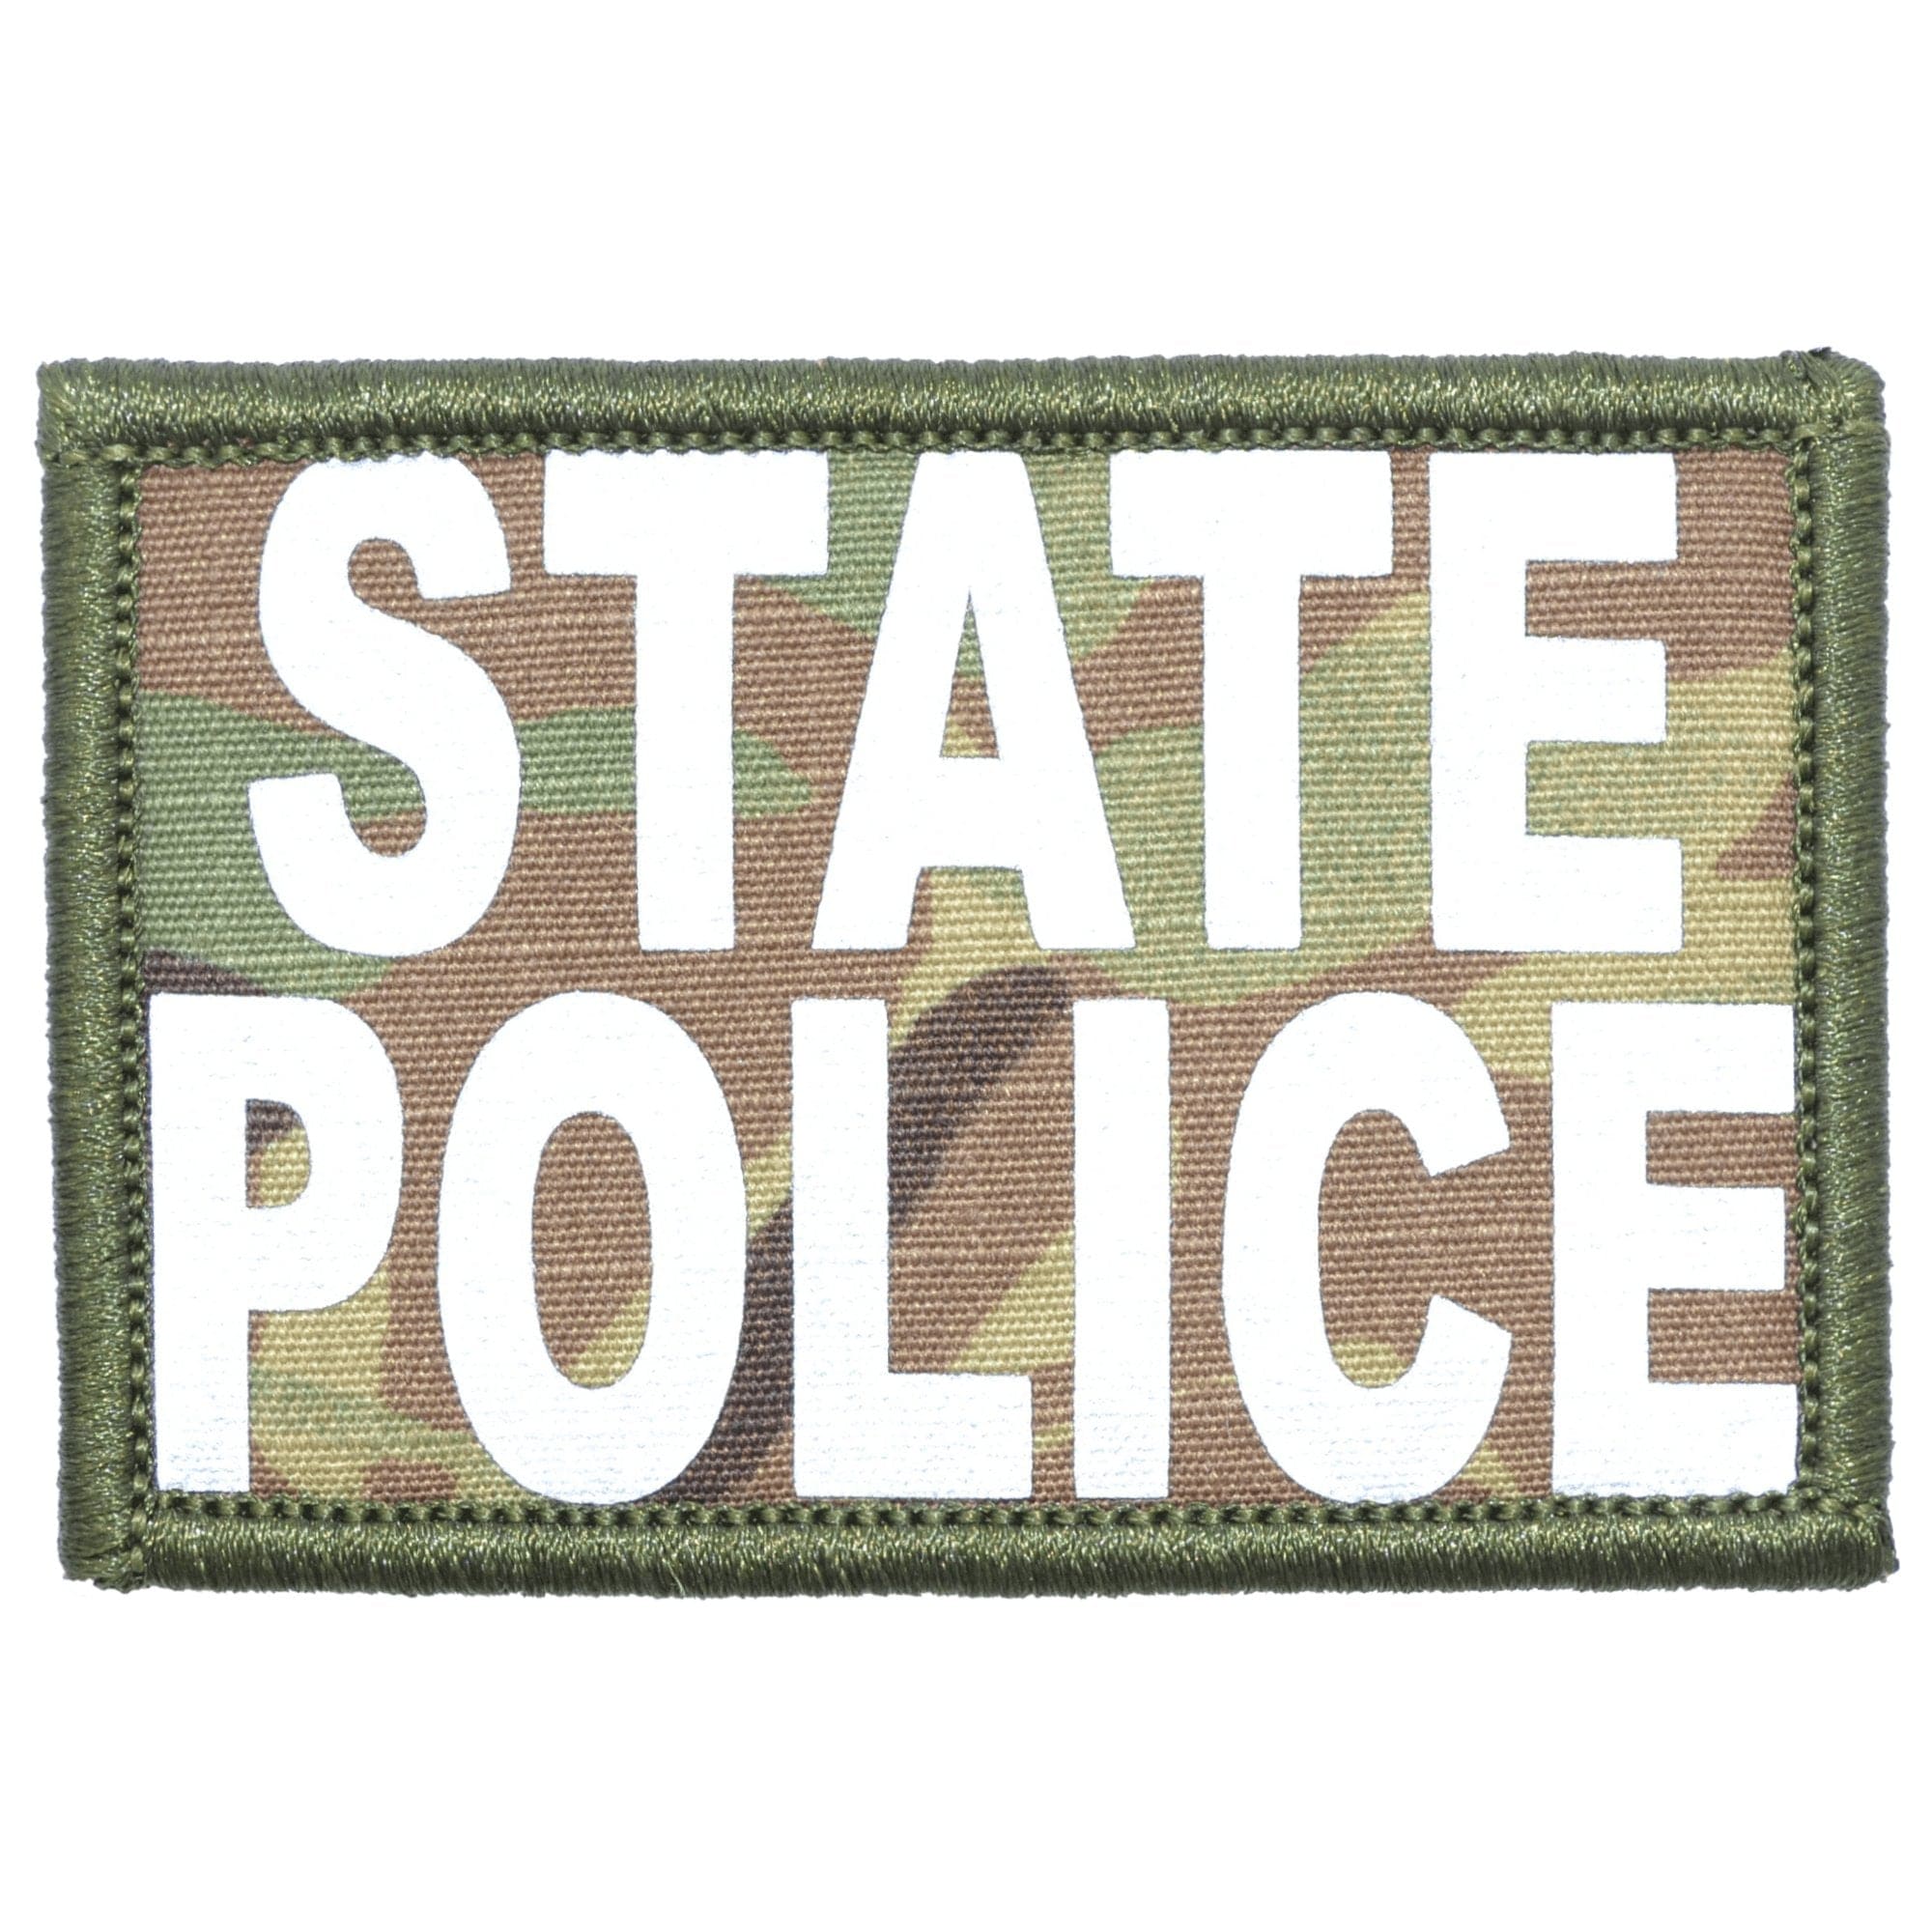 Police Reflective - 2x3 Patch Black | Tactical Gear Junkie